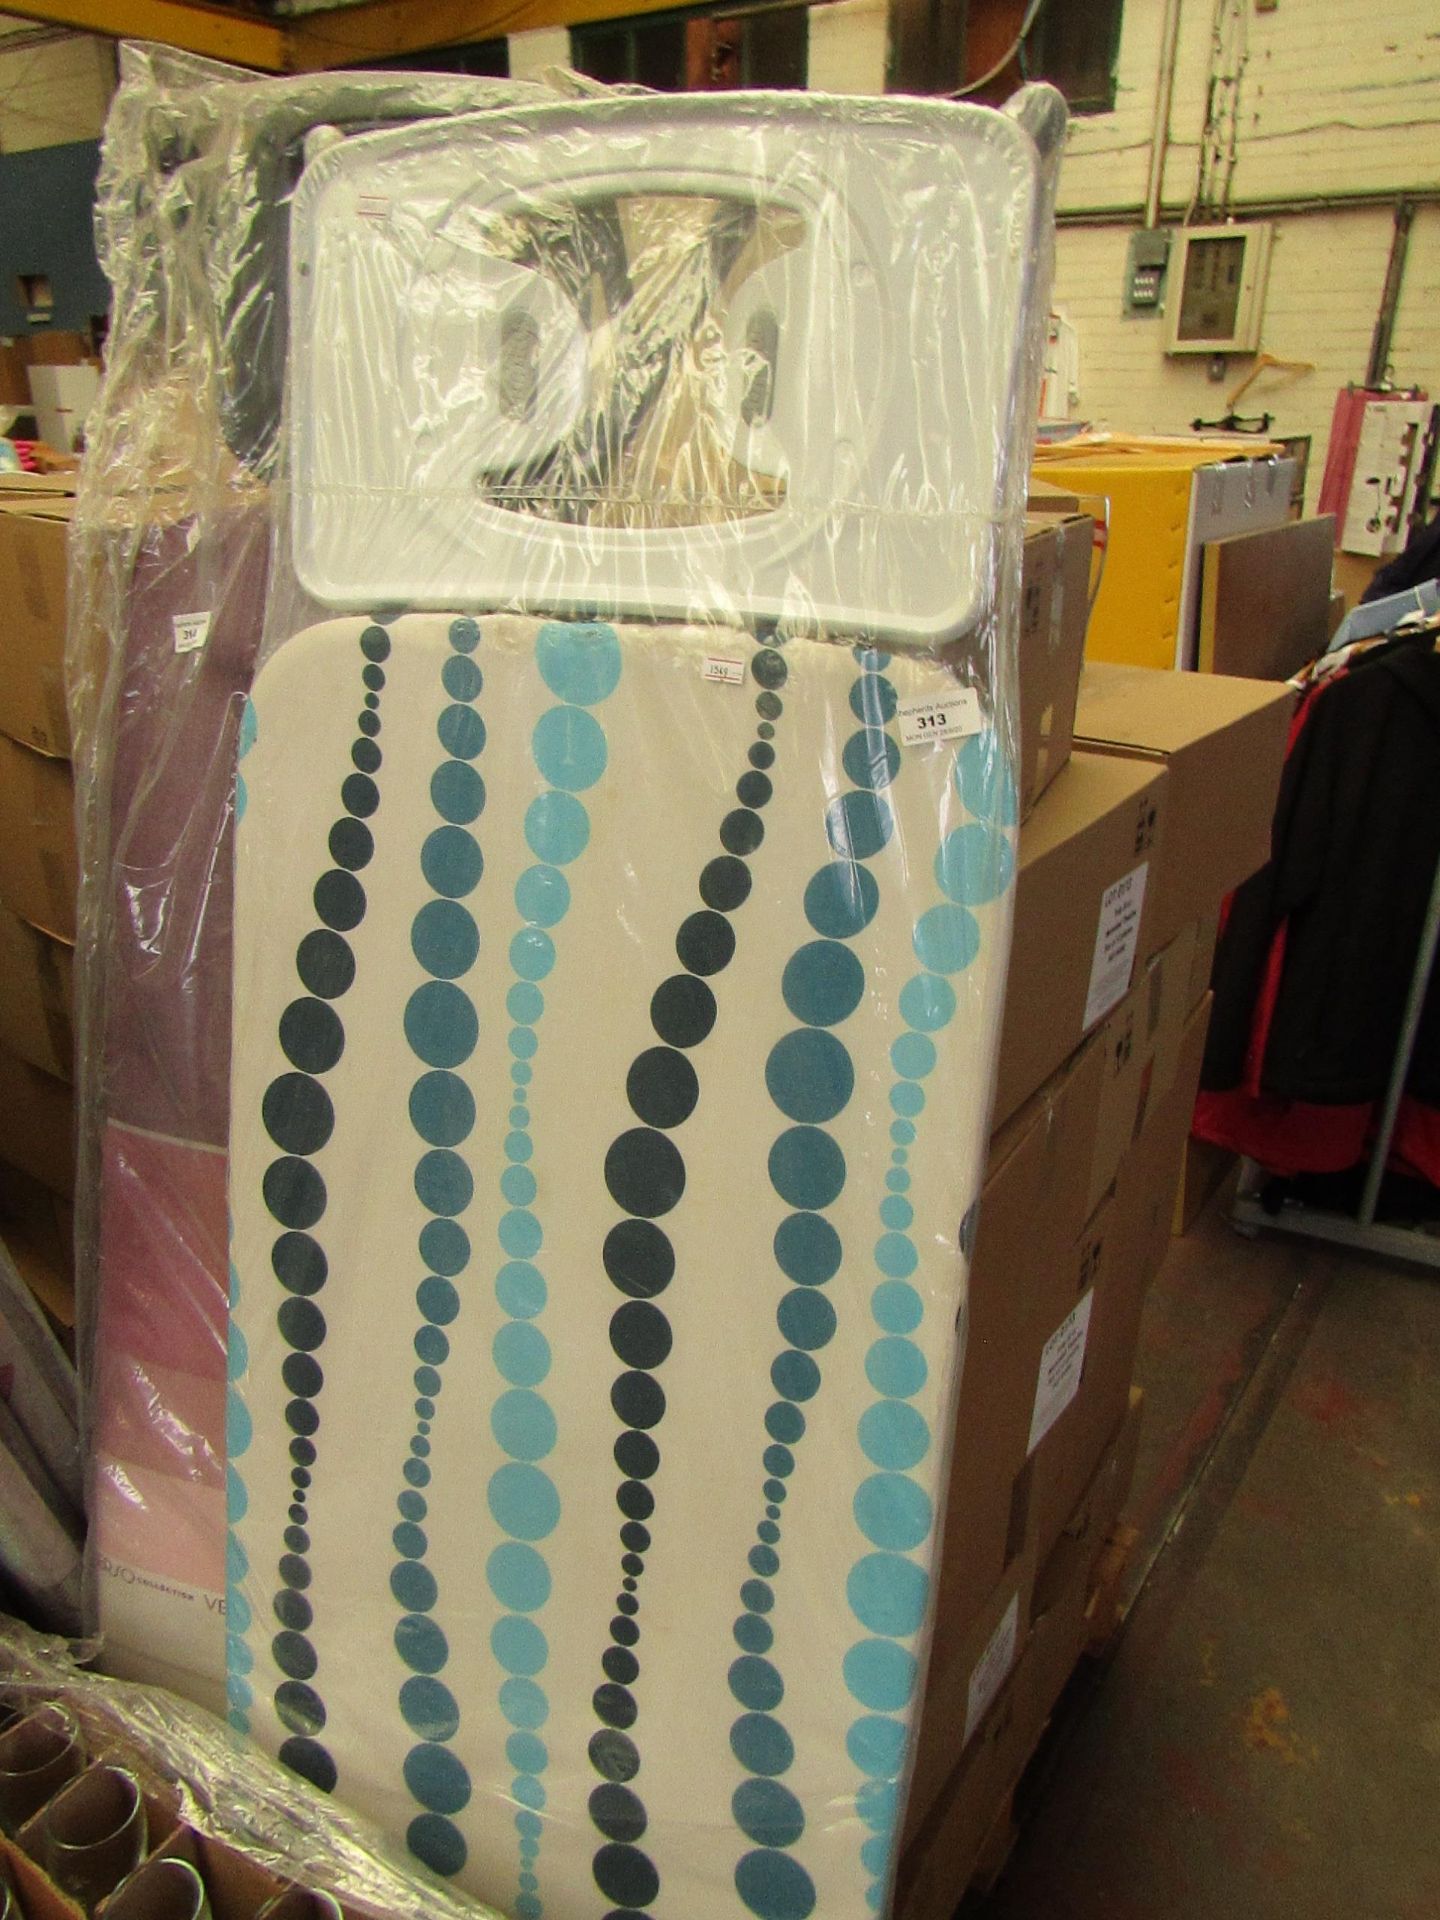 Minky - Ironing Boards - Please See Image - All Unchecked.